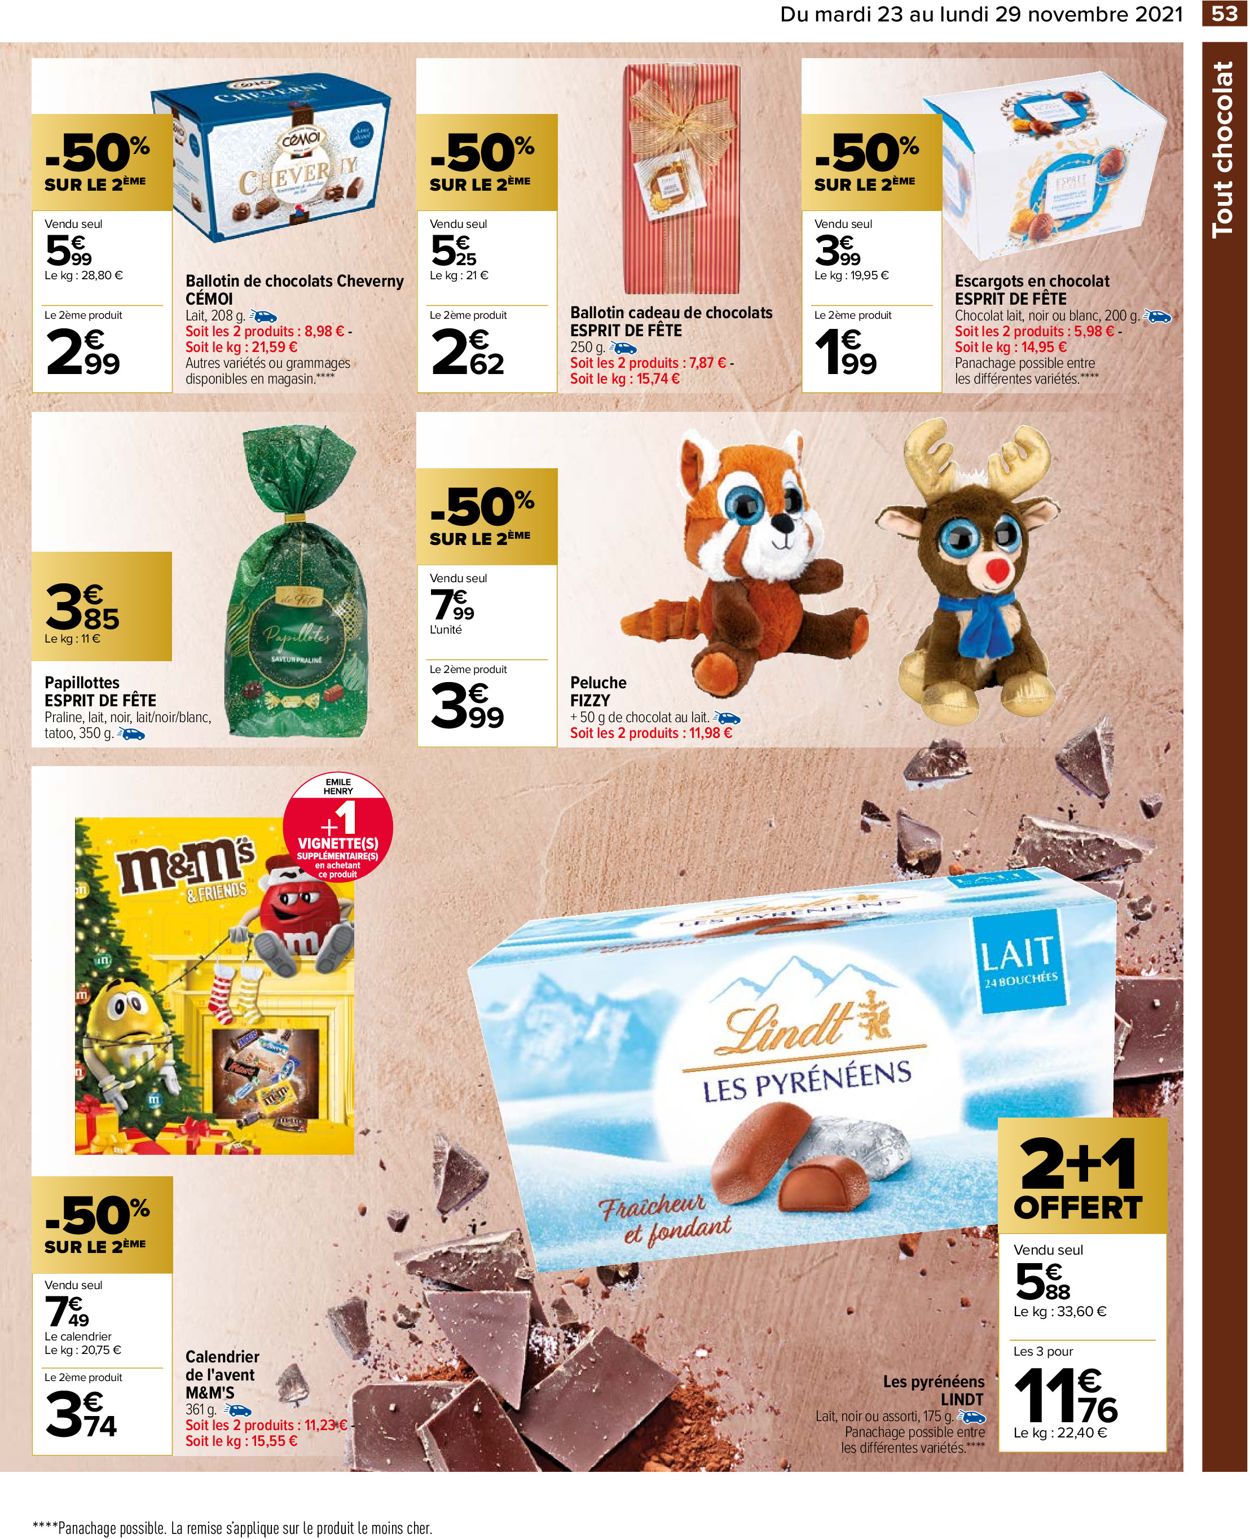 Carrefour BLACK WEEK 2021 Catalogue - 23.11-29.11.2021 (Page 54)